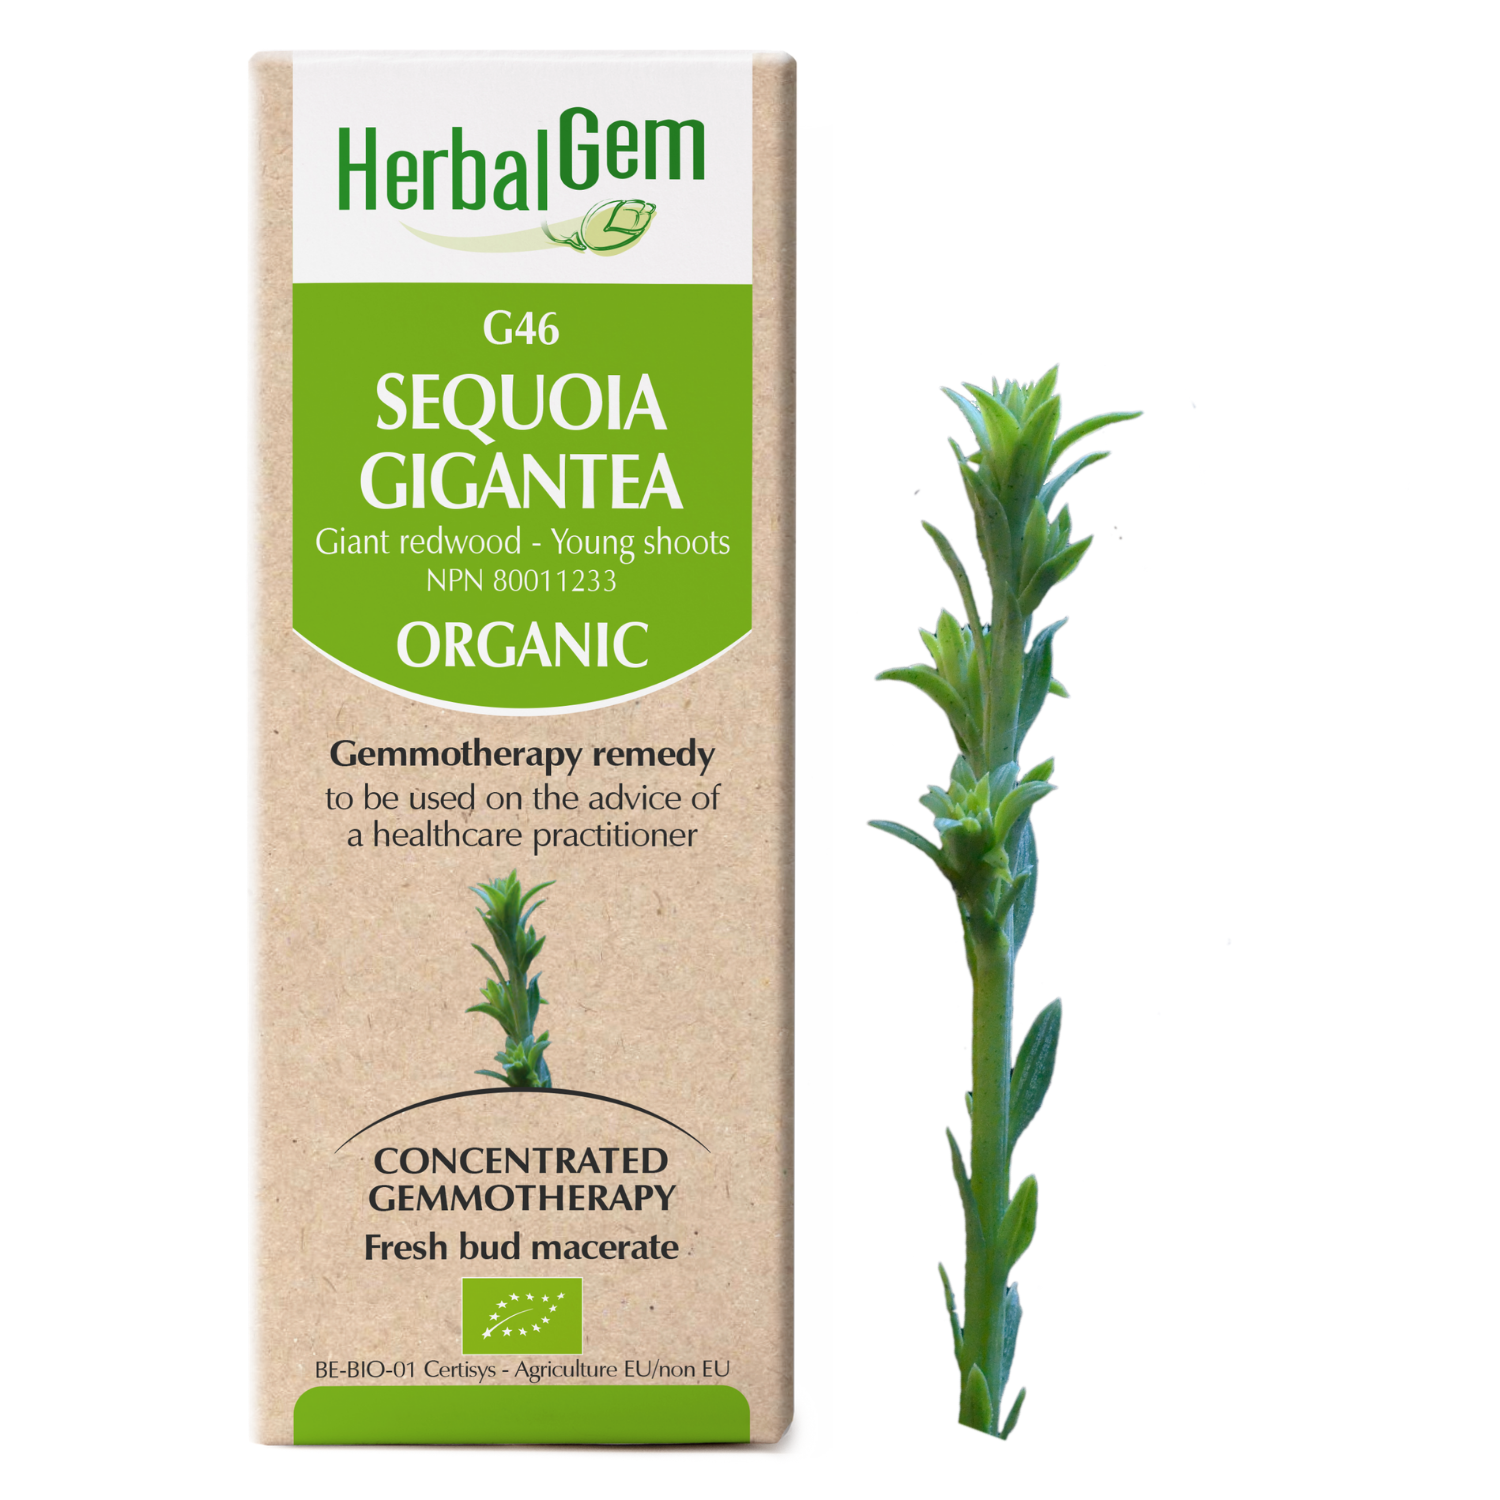 G46 Sequoia gigantea, Gemmotherapy, Organic Giant redwood Young shoots